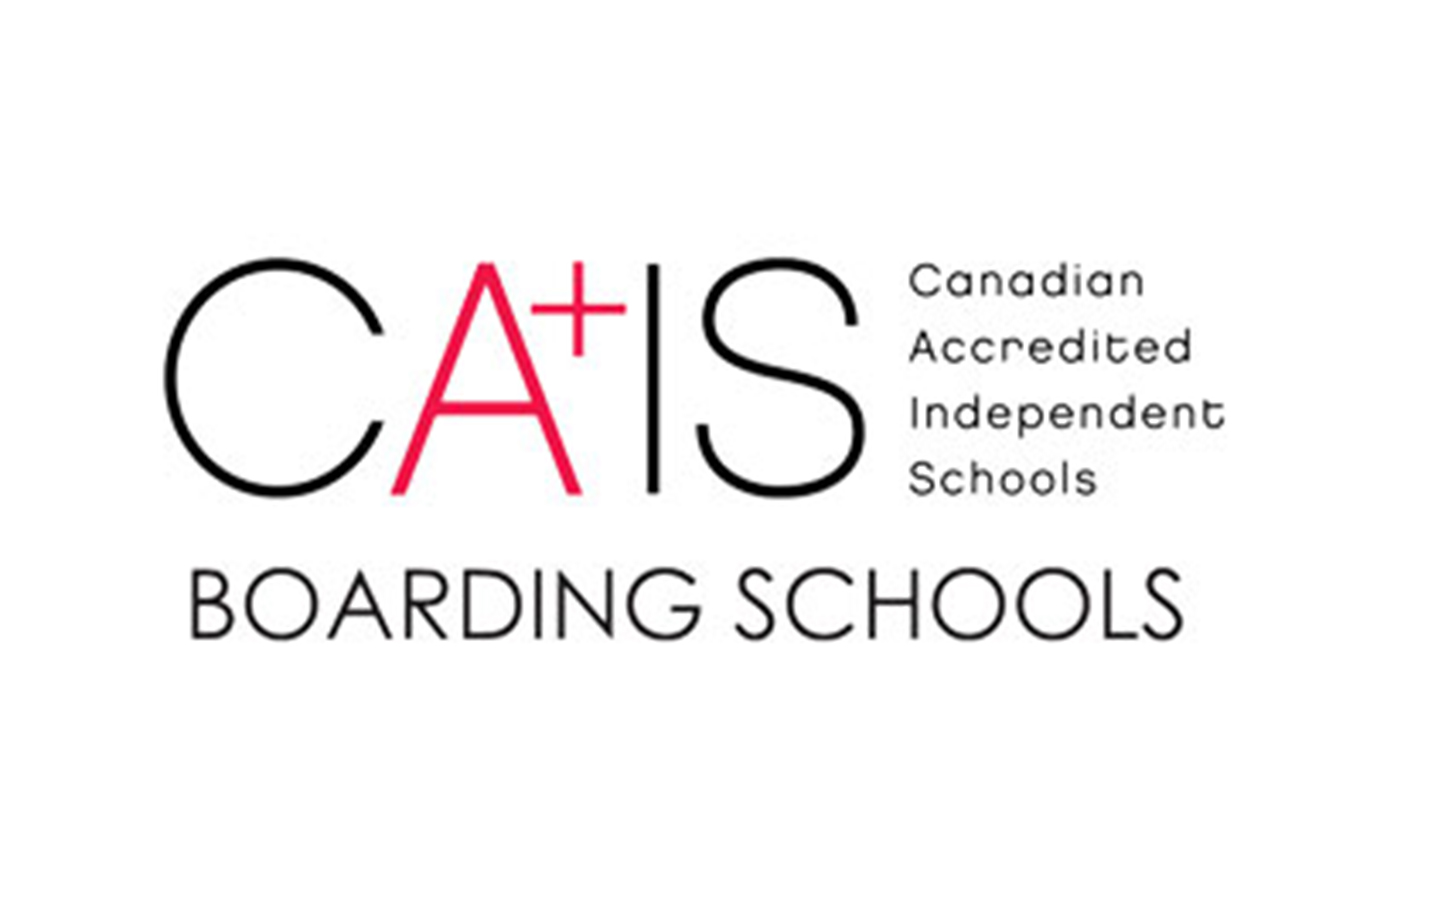 Canadian Accredited Independent School Boundary Training